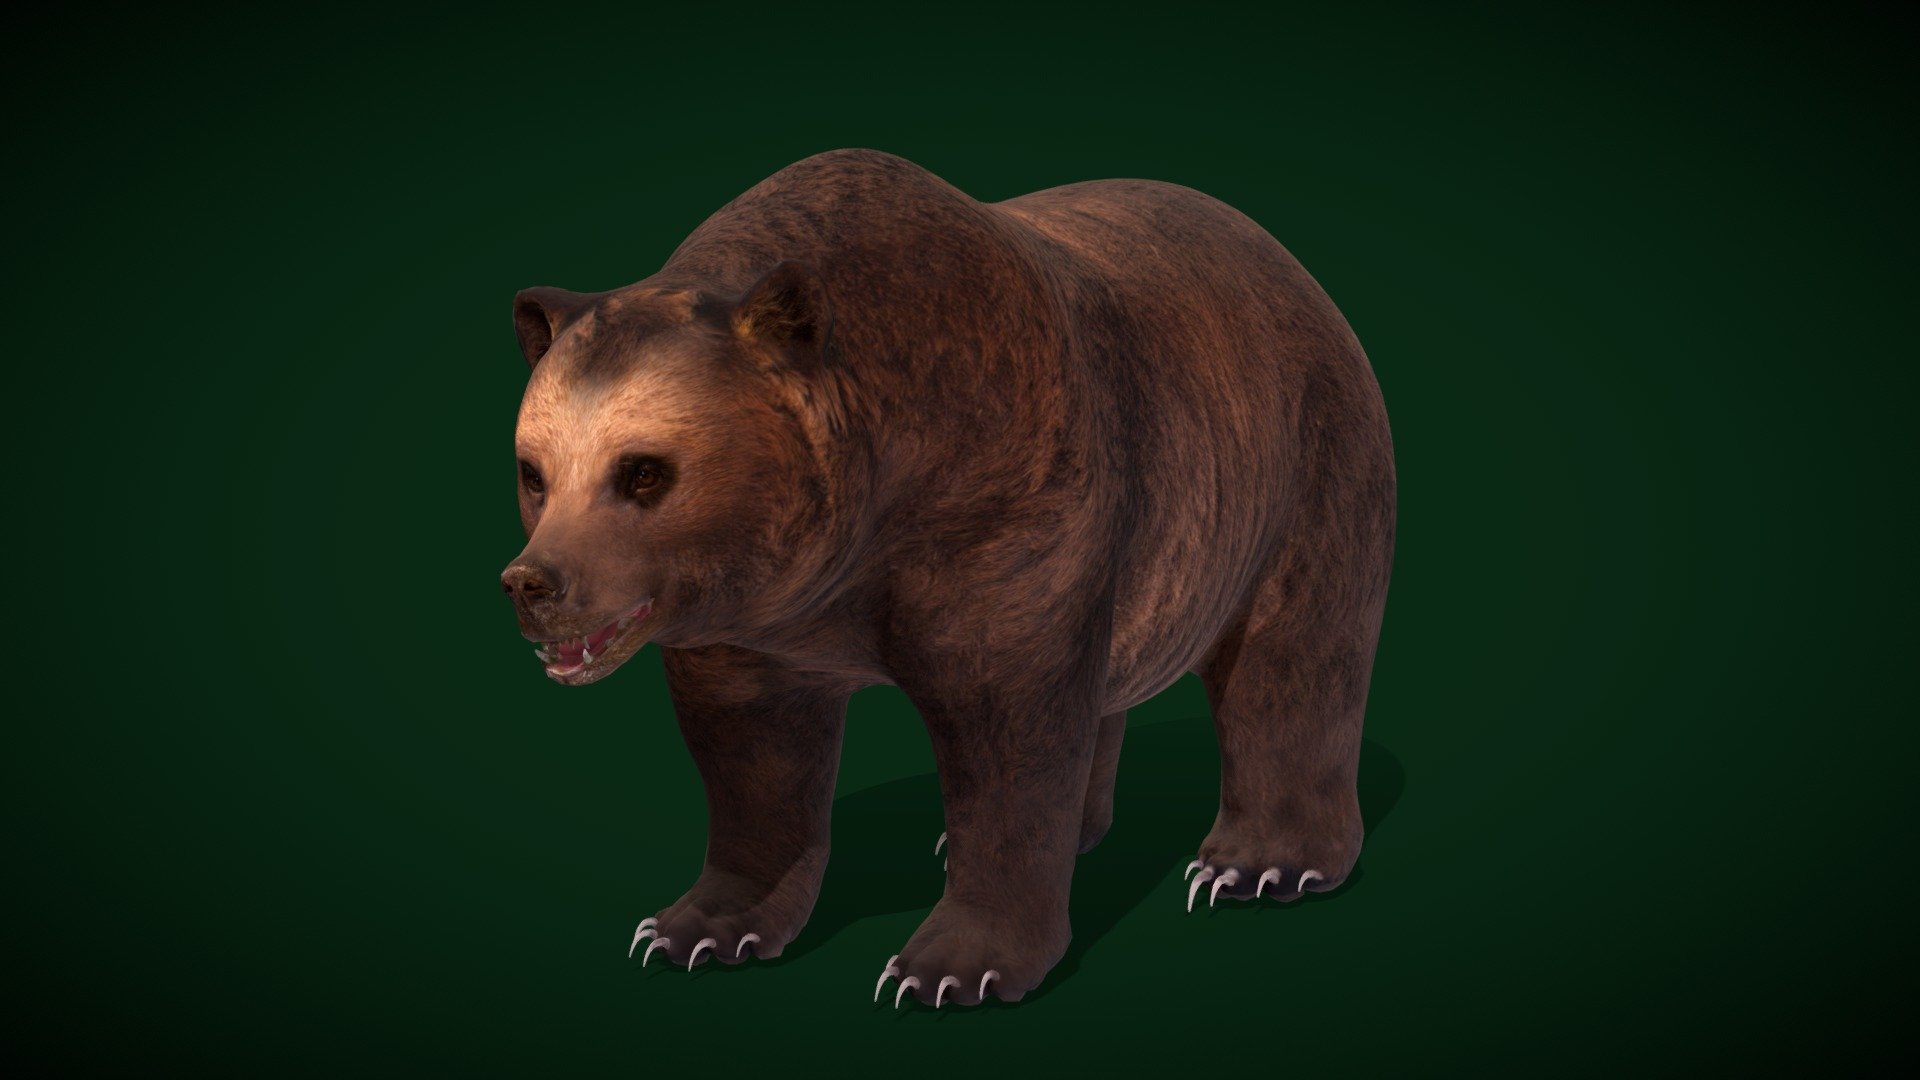 Grizzly Brown Bear Mammal(Brown Bear )omnivores,Pet,

Ursus arctos horribilis Animal (Sedgwick County Zoo)North American brown bear

1 Draw Calls

MidPoly

Game Ready (Character)

Subdivision Surface Ready

9- Animations 

4K PBR Textures 2 Material

Unreal/Unity FBX 

Blend File 3.6.5 LTS / 4

USDZ File (AR Ready). Real Scale Dimension (Xcode ,Reality Composer, Keynote Ready)

Textures Files

GLB File (Unreal 5.1 Plus Native Support)


Gltf File ( Spark AR, Lens Studio(SnapChat) , Effector(Tiktok) , Spline, Play Canvas,Omiverse ) Compatible




Triangles -40313



Faces -21048

Edges -41421

Vertices -20397

Diffuse, Metallic, Roughness , Normal Map ,Specular Map,AO


The grizzly bear, also known as the North American brown bear or simply grizzly, is a population or subspecies of the brown bear inhabiting North America. In addition to the mainland grizzly, other morphological forms of brown bear in North America are sometimes identified as grizzly bears - Grizzly Brown Bear (GameReady) - Buy Royalty Free 3D model by Nyilonelycompany 3d model